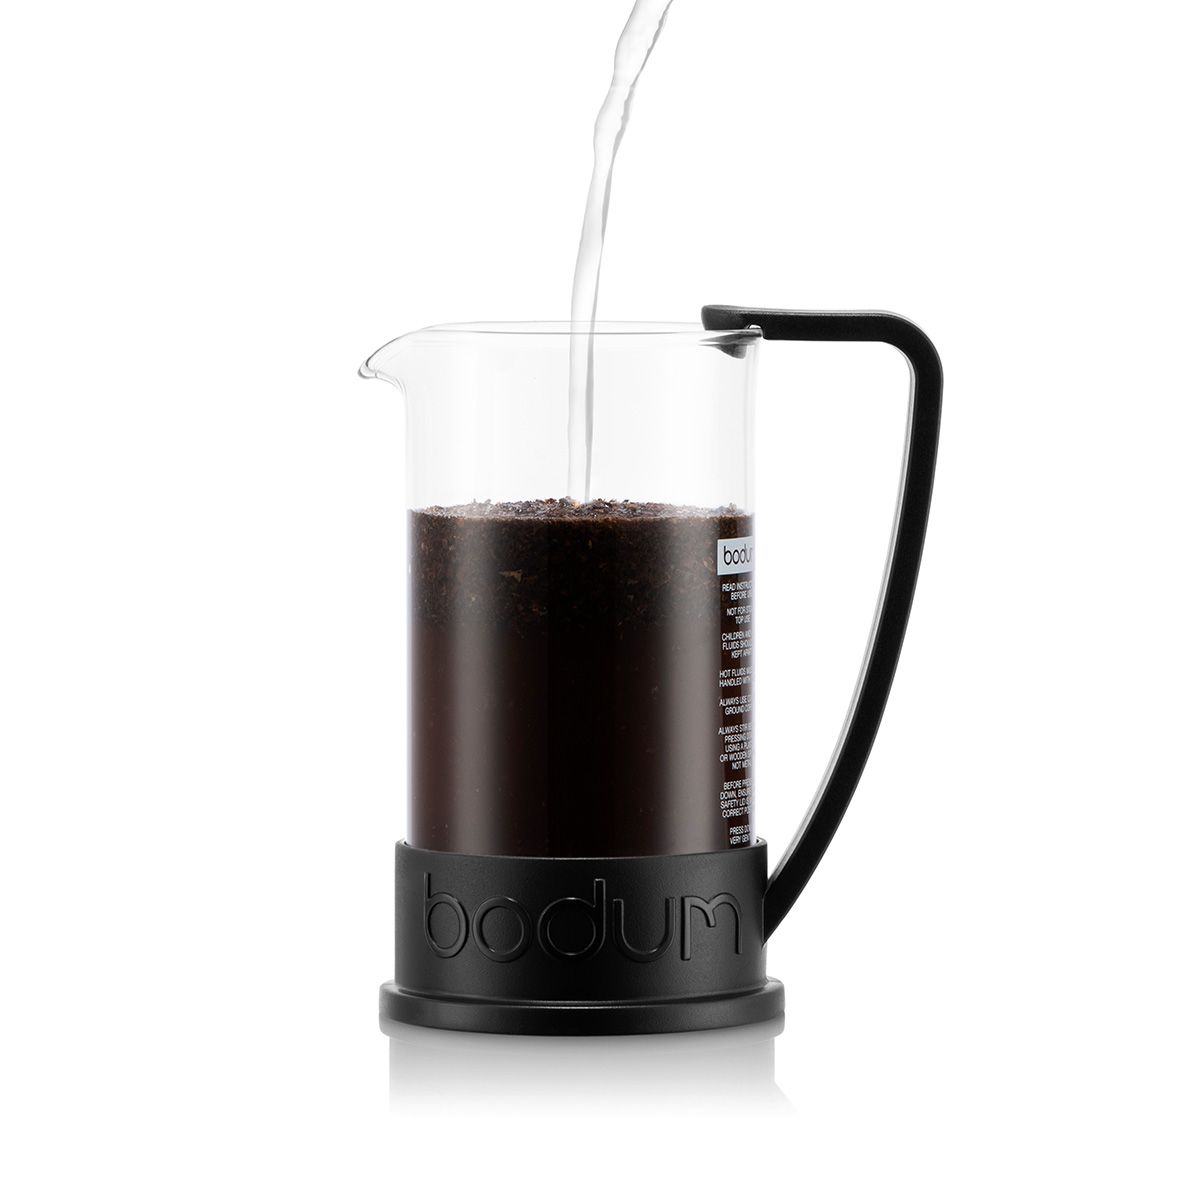 https://cdn.shopify.com/s/files/1/0559/4169/3474/products/cafetiere-french-press-3-tasses-035-l-12-oz-832720.jpg?v=1674762139&width=1200